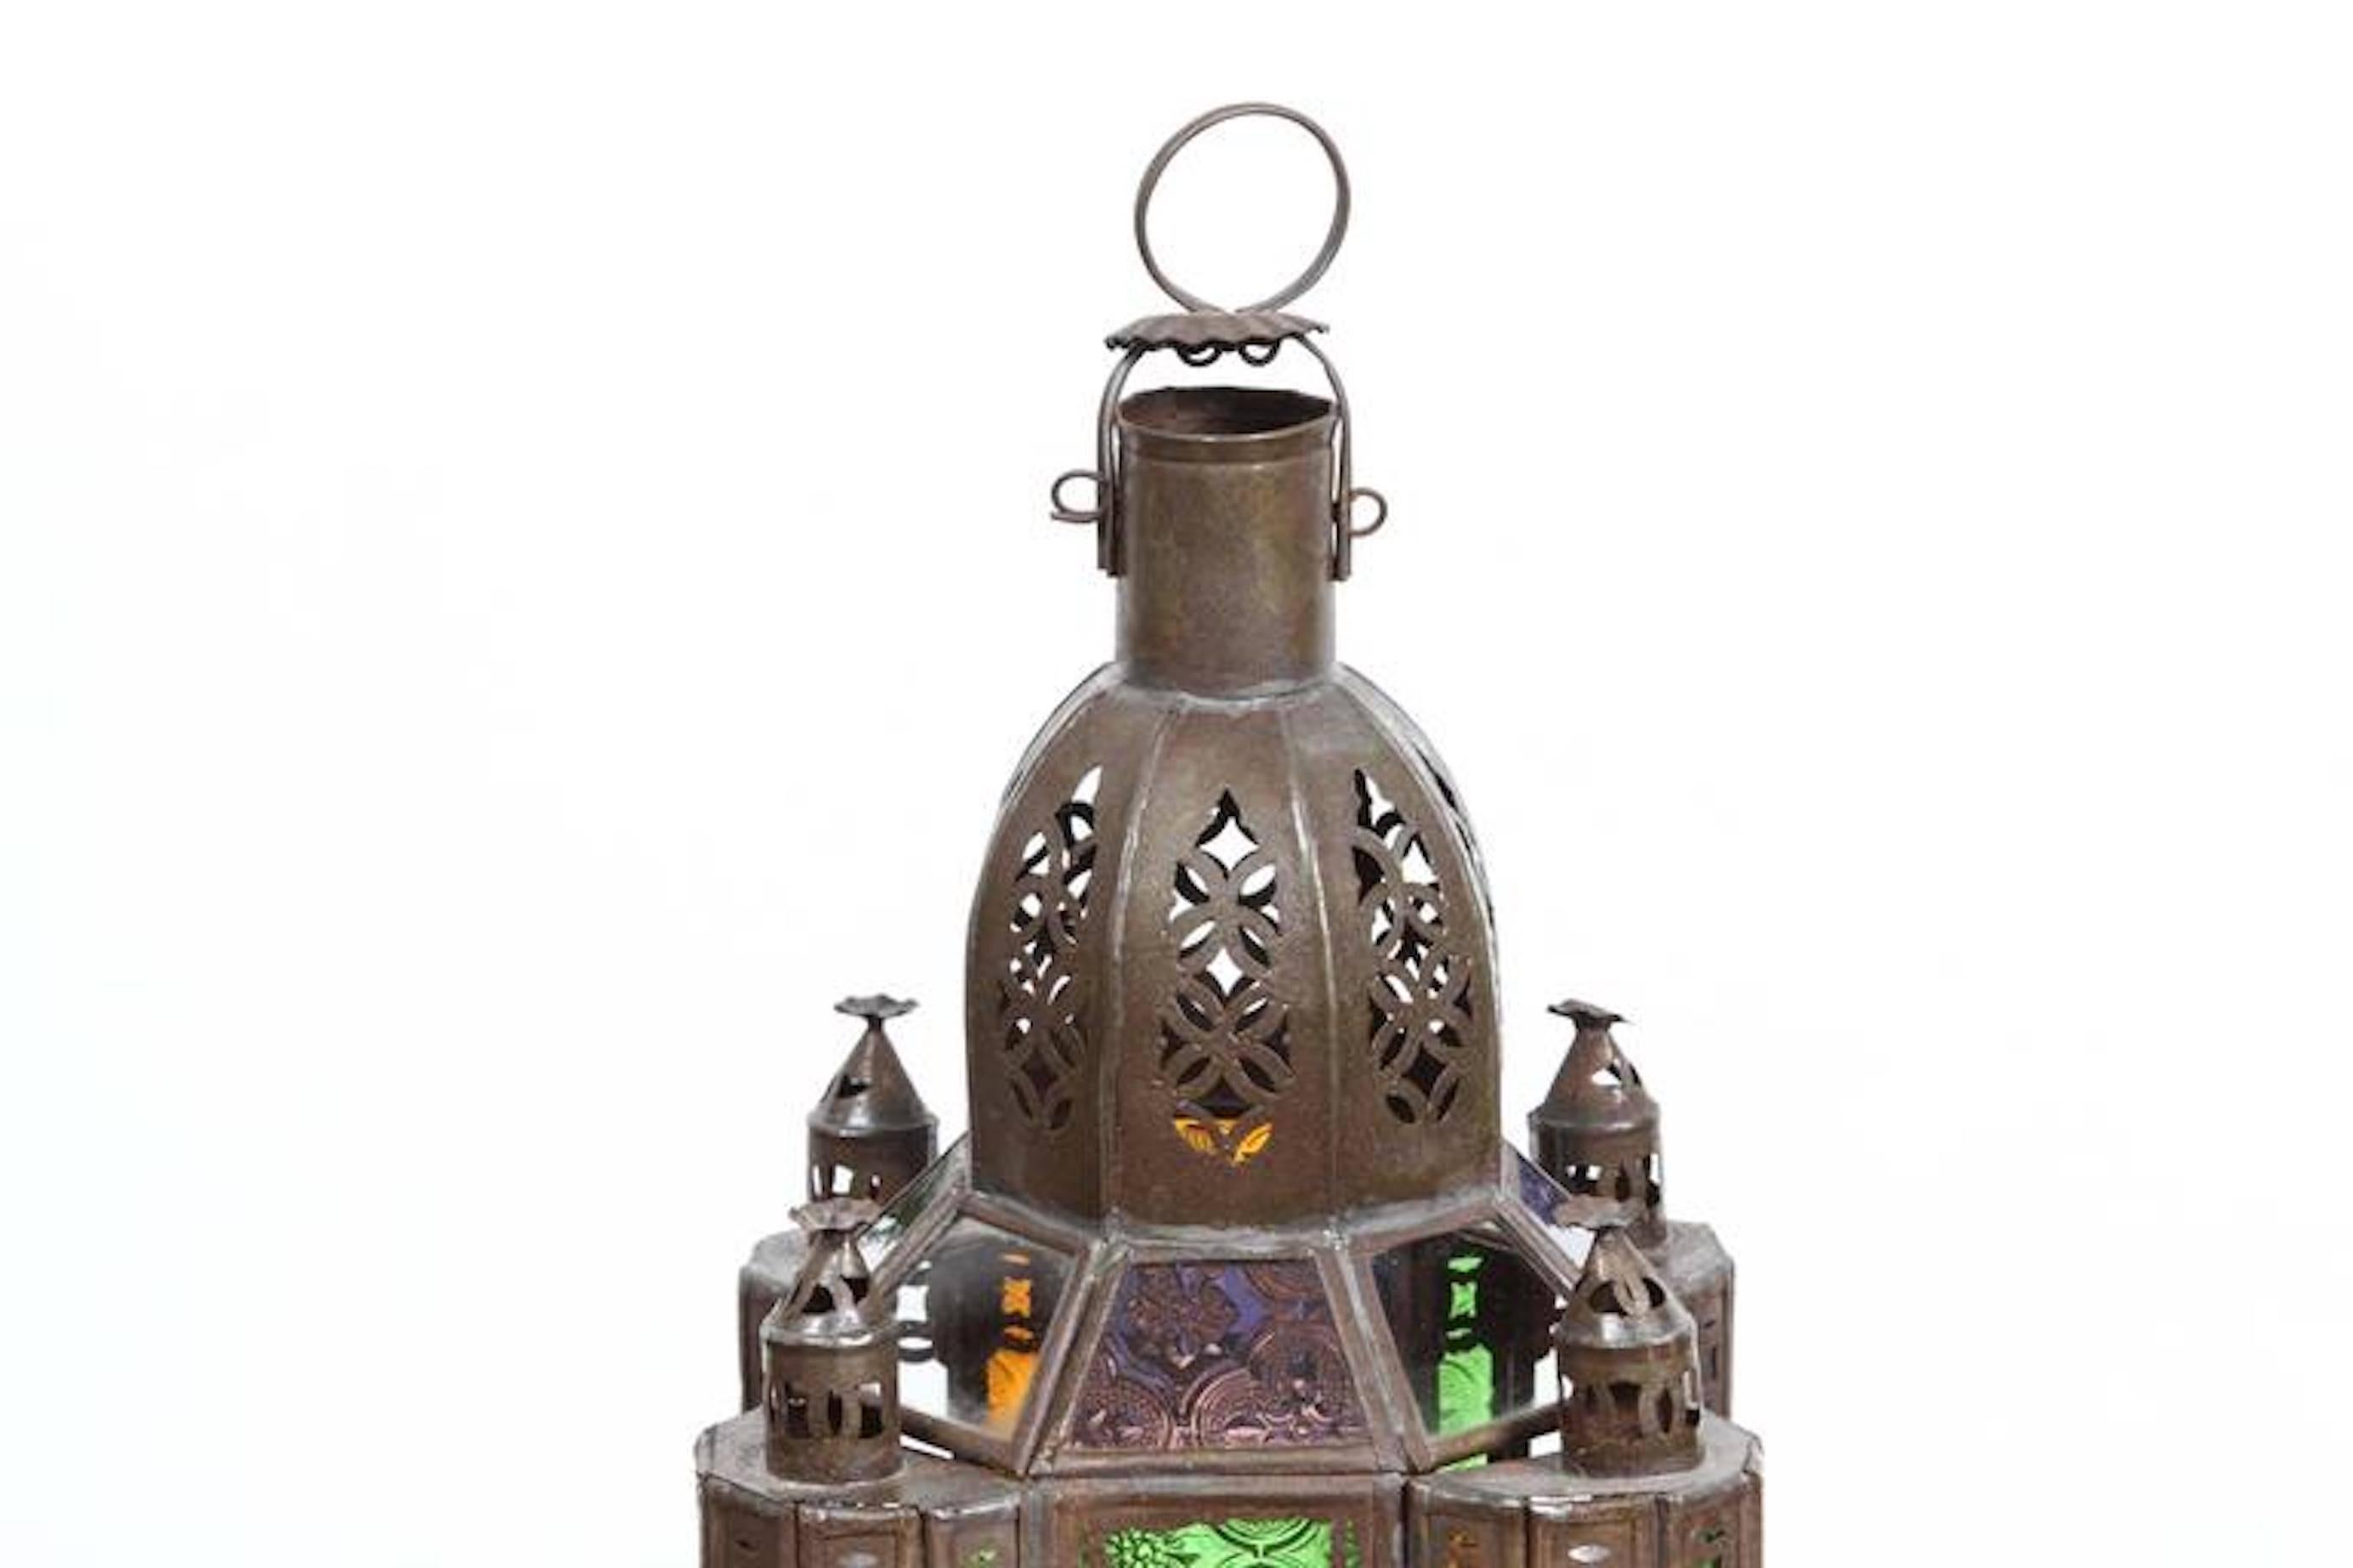 Handcrafted small Moroccan glass lantern or Moorish pendant.
Multicolor molded glass in green, lavender, blue and clear.
Hurricane candle lamp handmade in Marrakech, vintage metal in rust color finish.
Nice Moorish shape, could be used as a candle